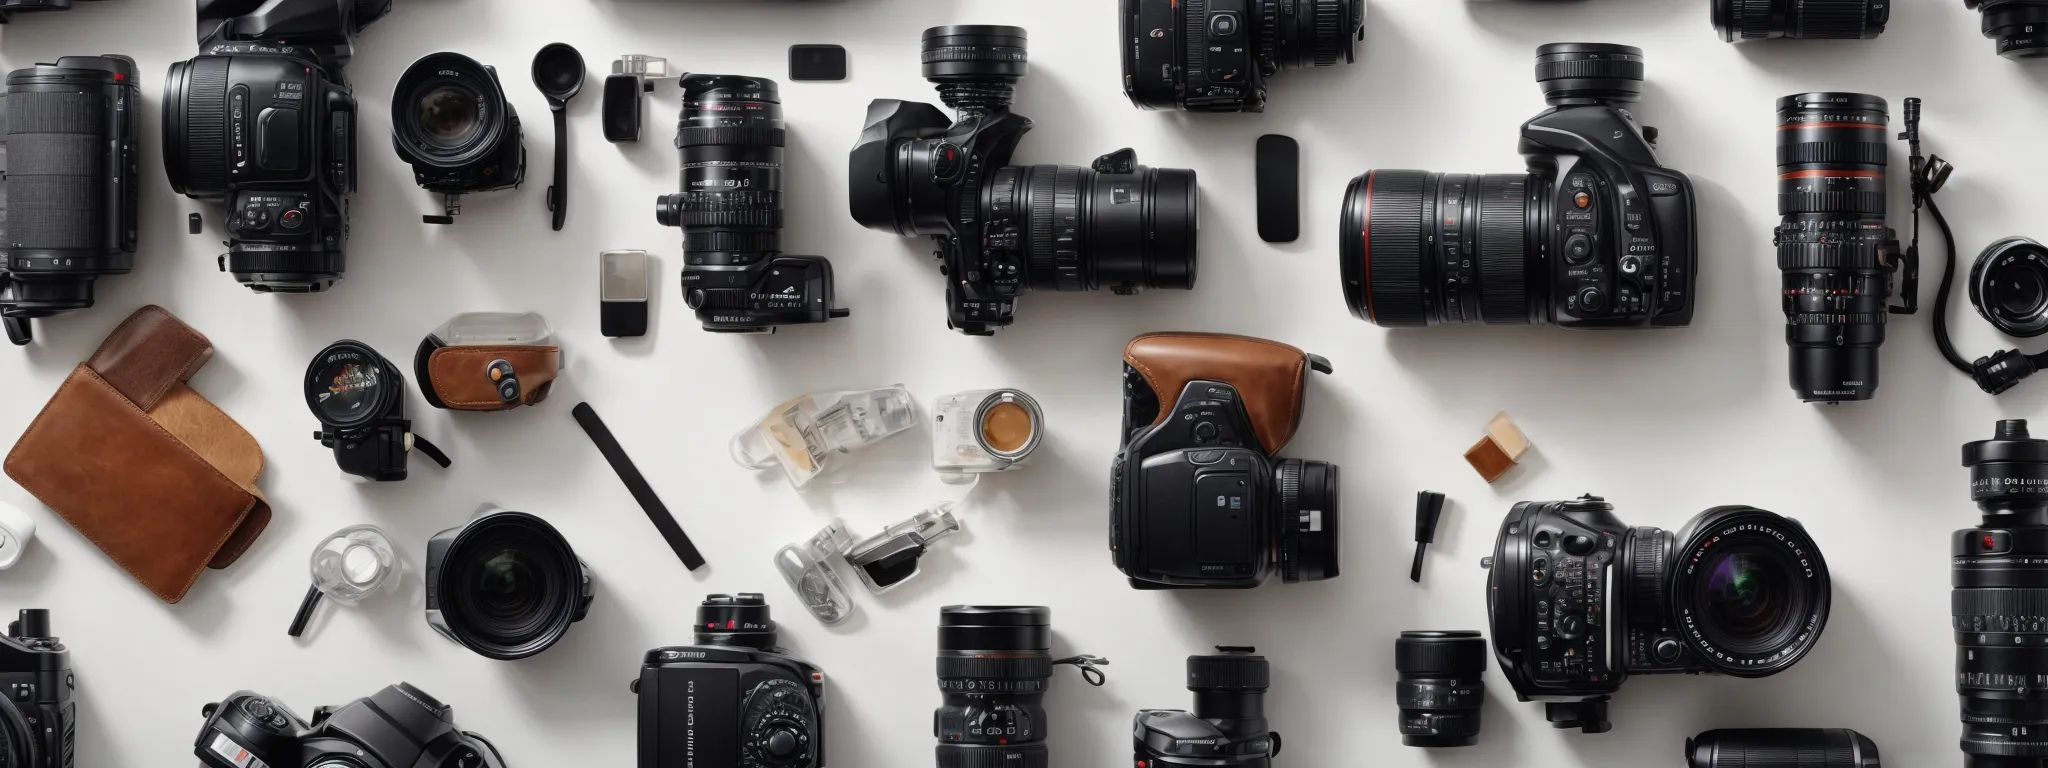 a professional camera focuses on a neatly arranged product against a clean, white background.